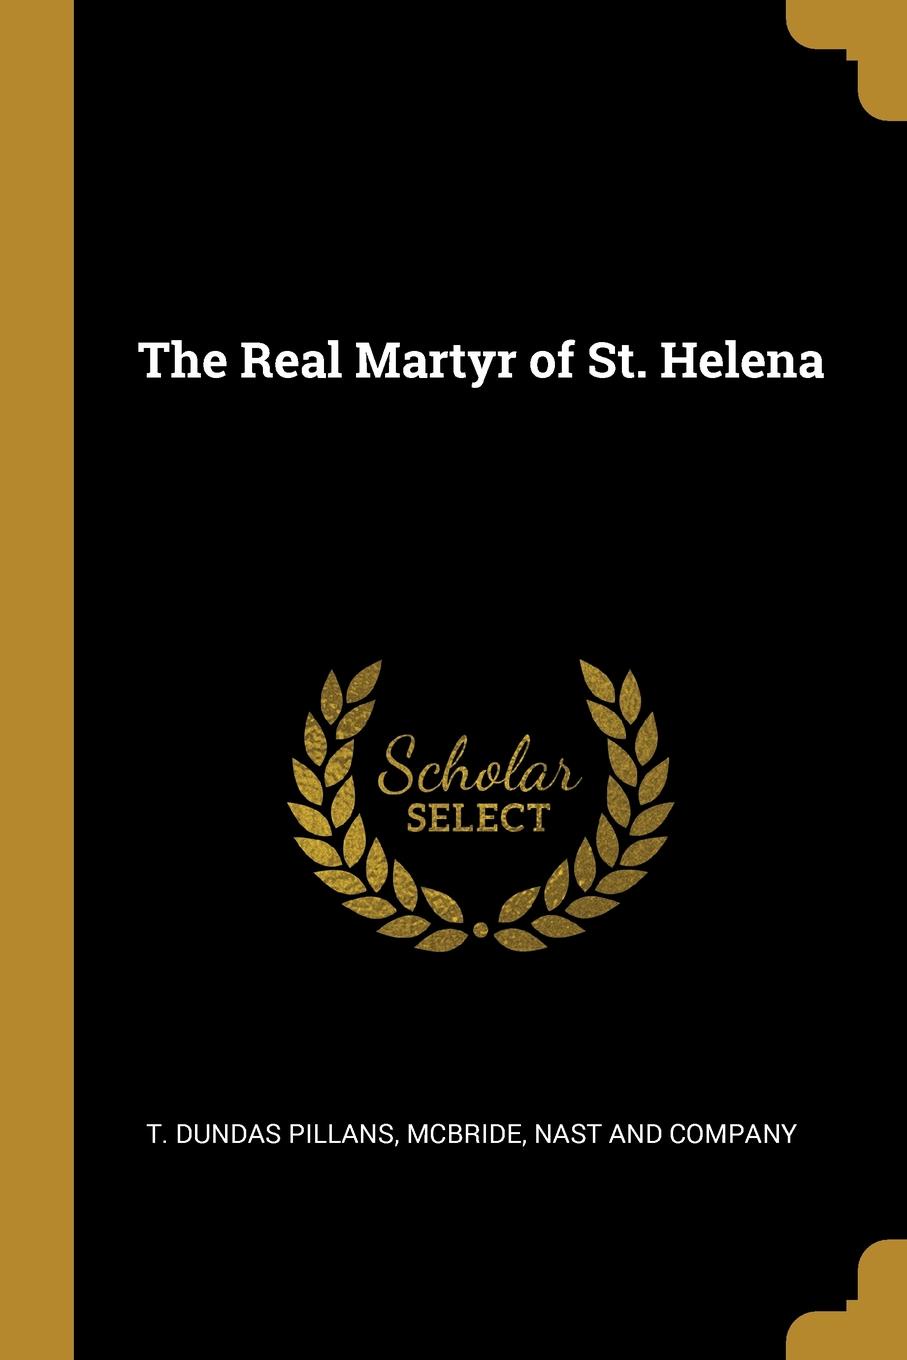 The Real Martyr of St. Helena